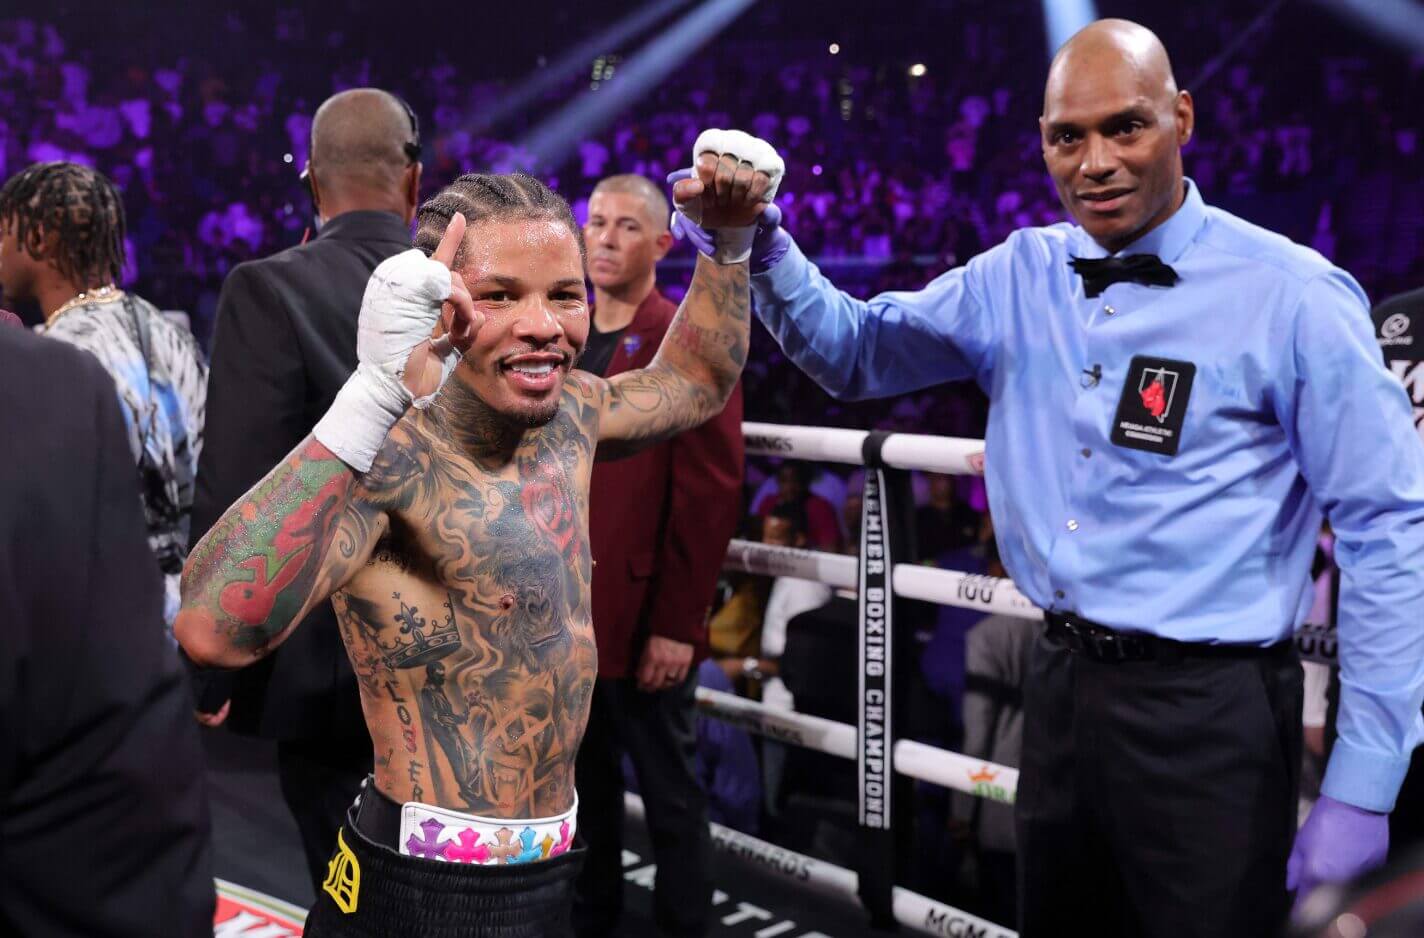 Gervonta Davis retained his WBA title with a knockout of Frank Martin